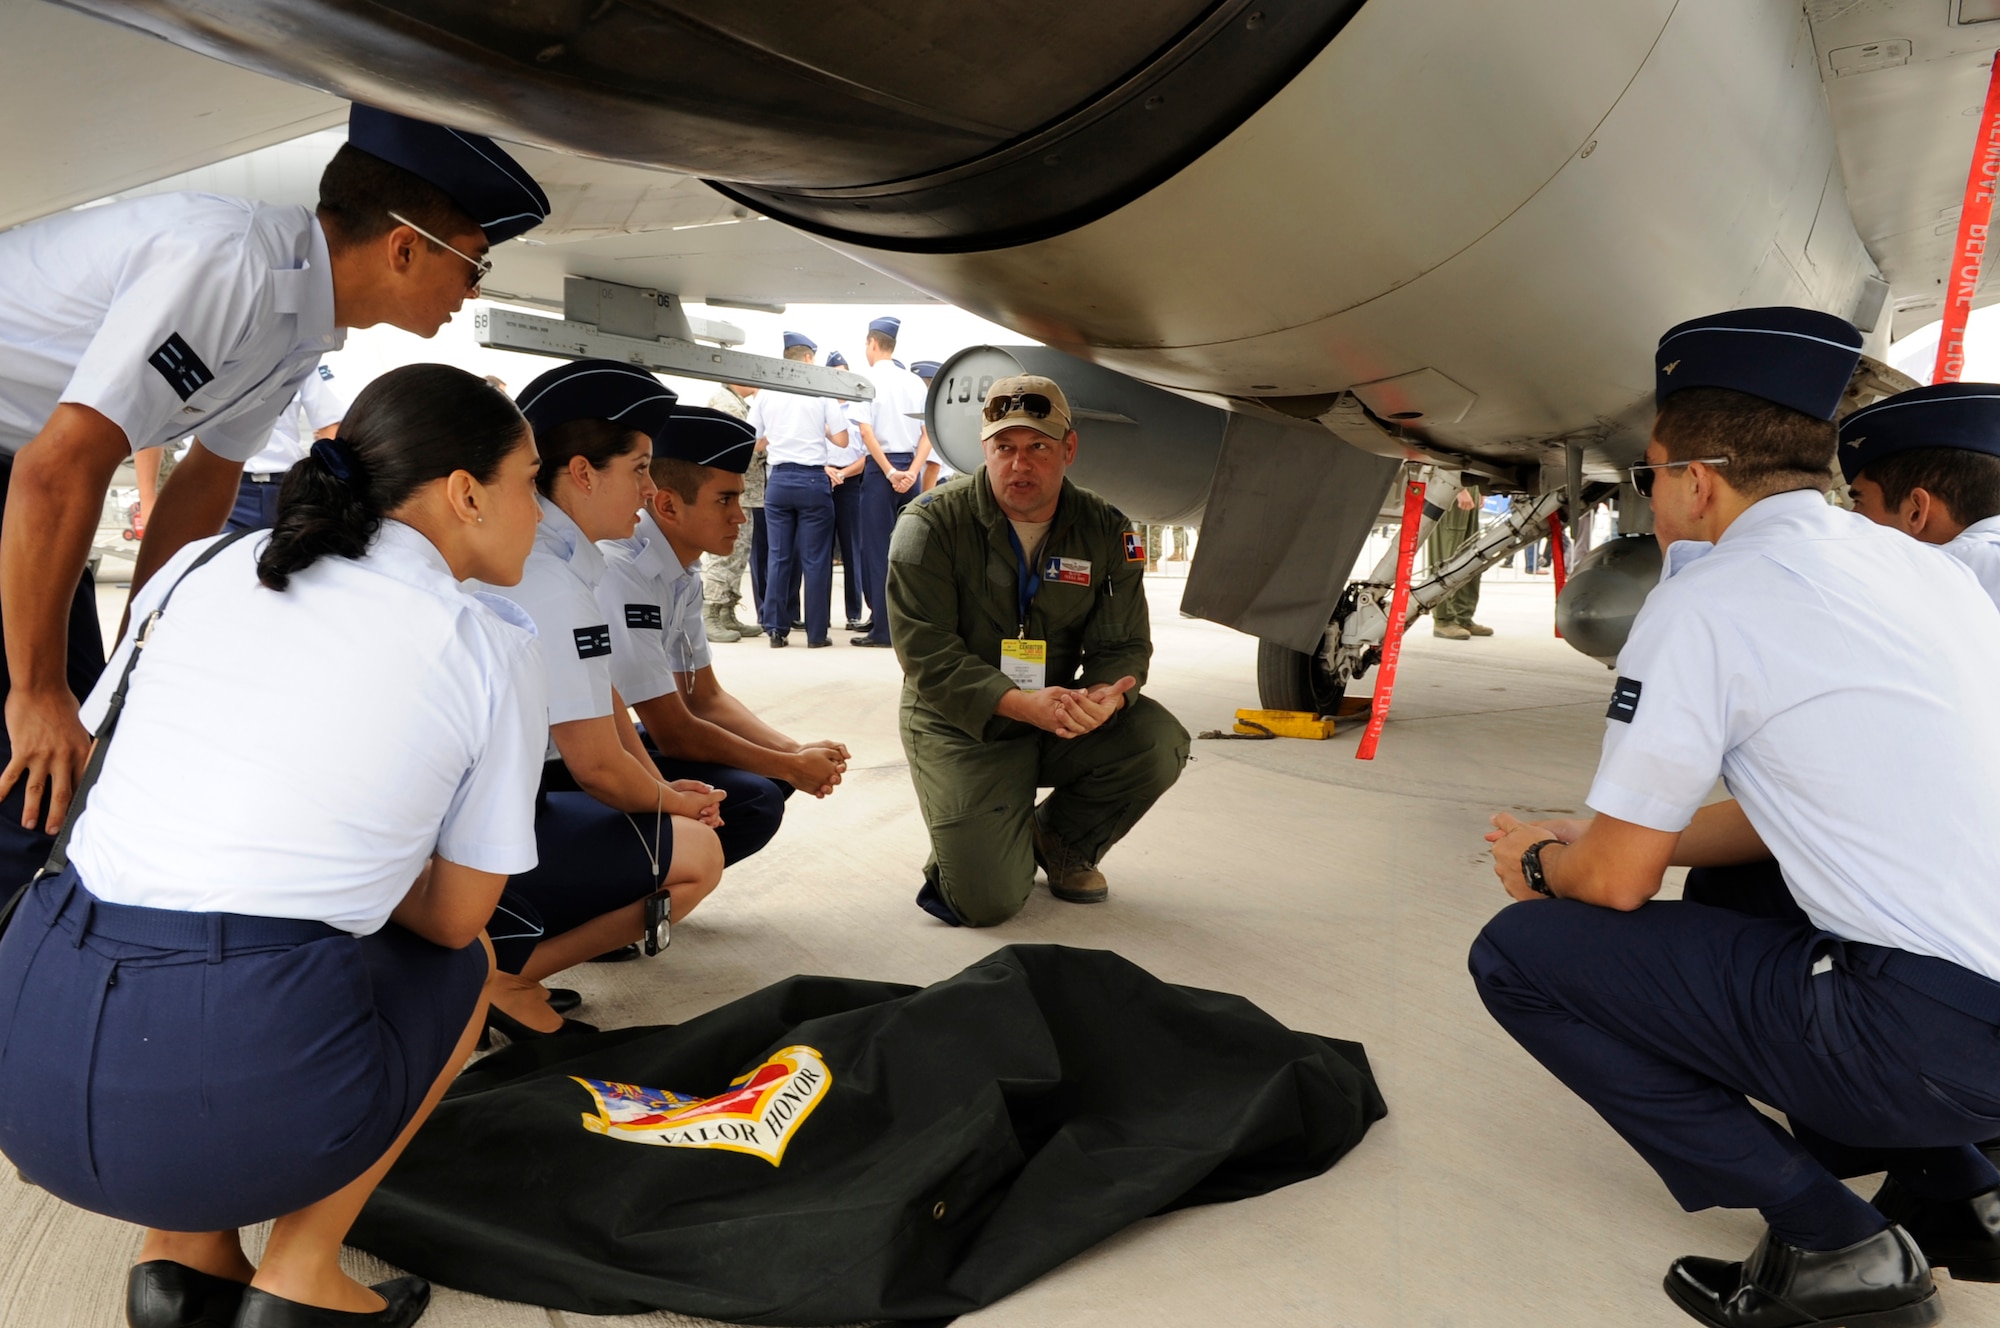 Lt. Col. Greg Pohoski, an F-16 instructor pilot with the 149th Fighter Wing, Texas Air National Guard, discusses flying operations with cadets from FACH (Fuerza Aerae de Chile), the Chilean air force, at FIDAE (Feria Internacional del Aire y del Espacio), an international trade exhibition air and space show, in Santiago, Chile, March 27, 2014. Pohoski was in Chile with members of the Texas Air National Guard for a subject matter expert exchange through the National Guard Bureau's State Partnership Program. (U.S. Air National Guard photo by Senior Master Sgt. Miguel Arellano / Released)